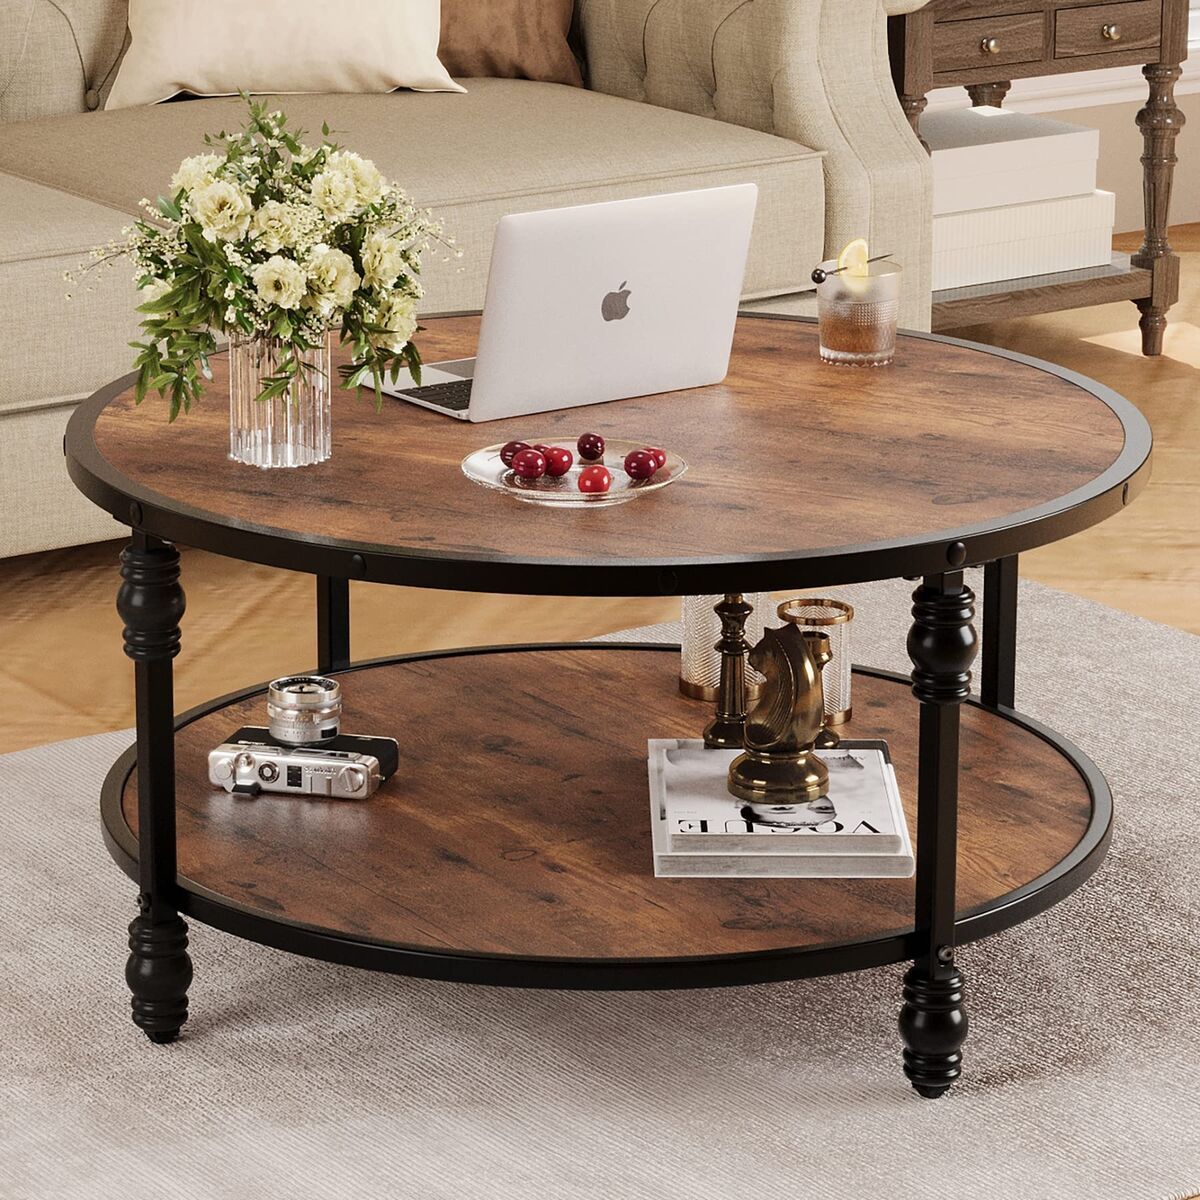 Rustic Wood Coffee Table Round Center Coffee Table W/ Storage Shelf Metal  Frame | Ebay For Metal 1 Shelf Coffee Tables (View 13 of 15)